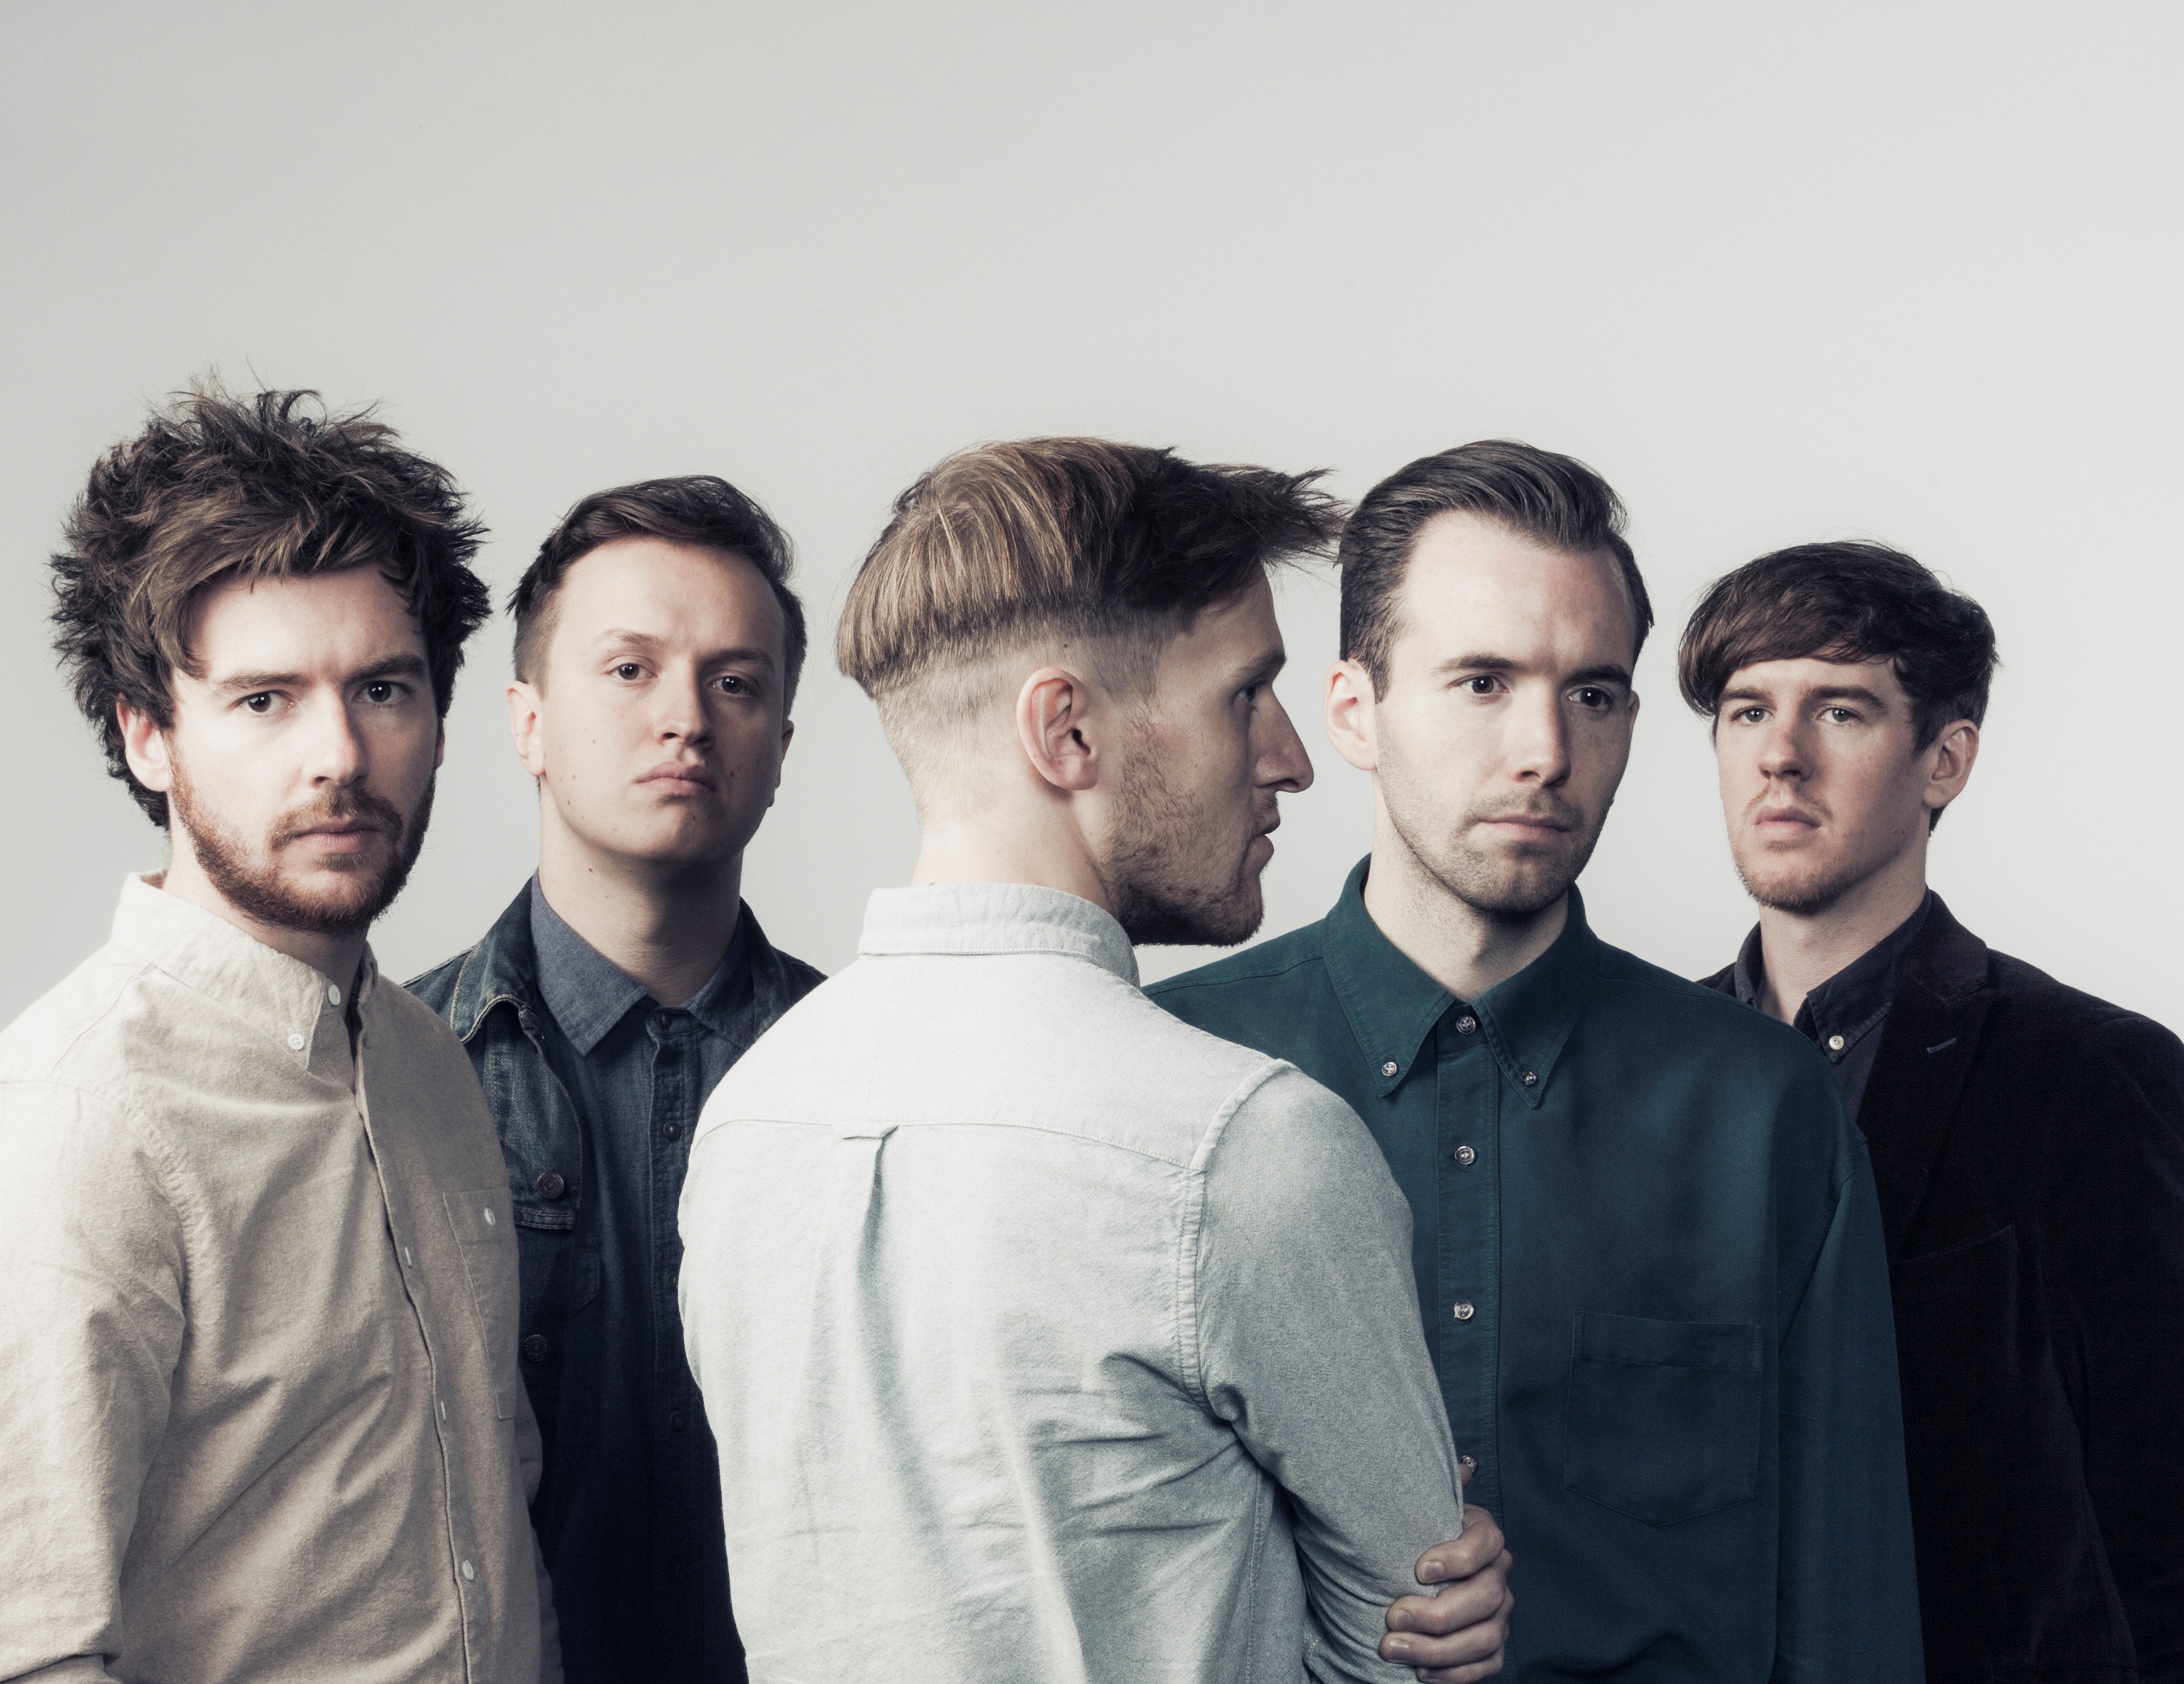 Dutch Uncles “Upsilon”: Why I wrote a song about social media